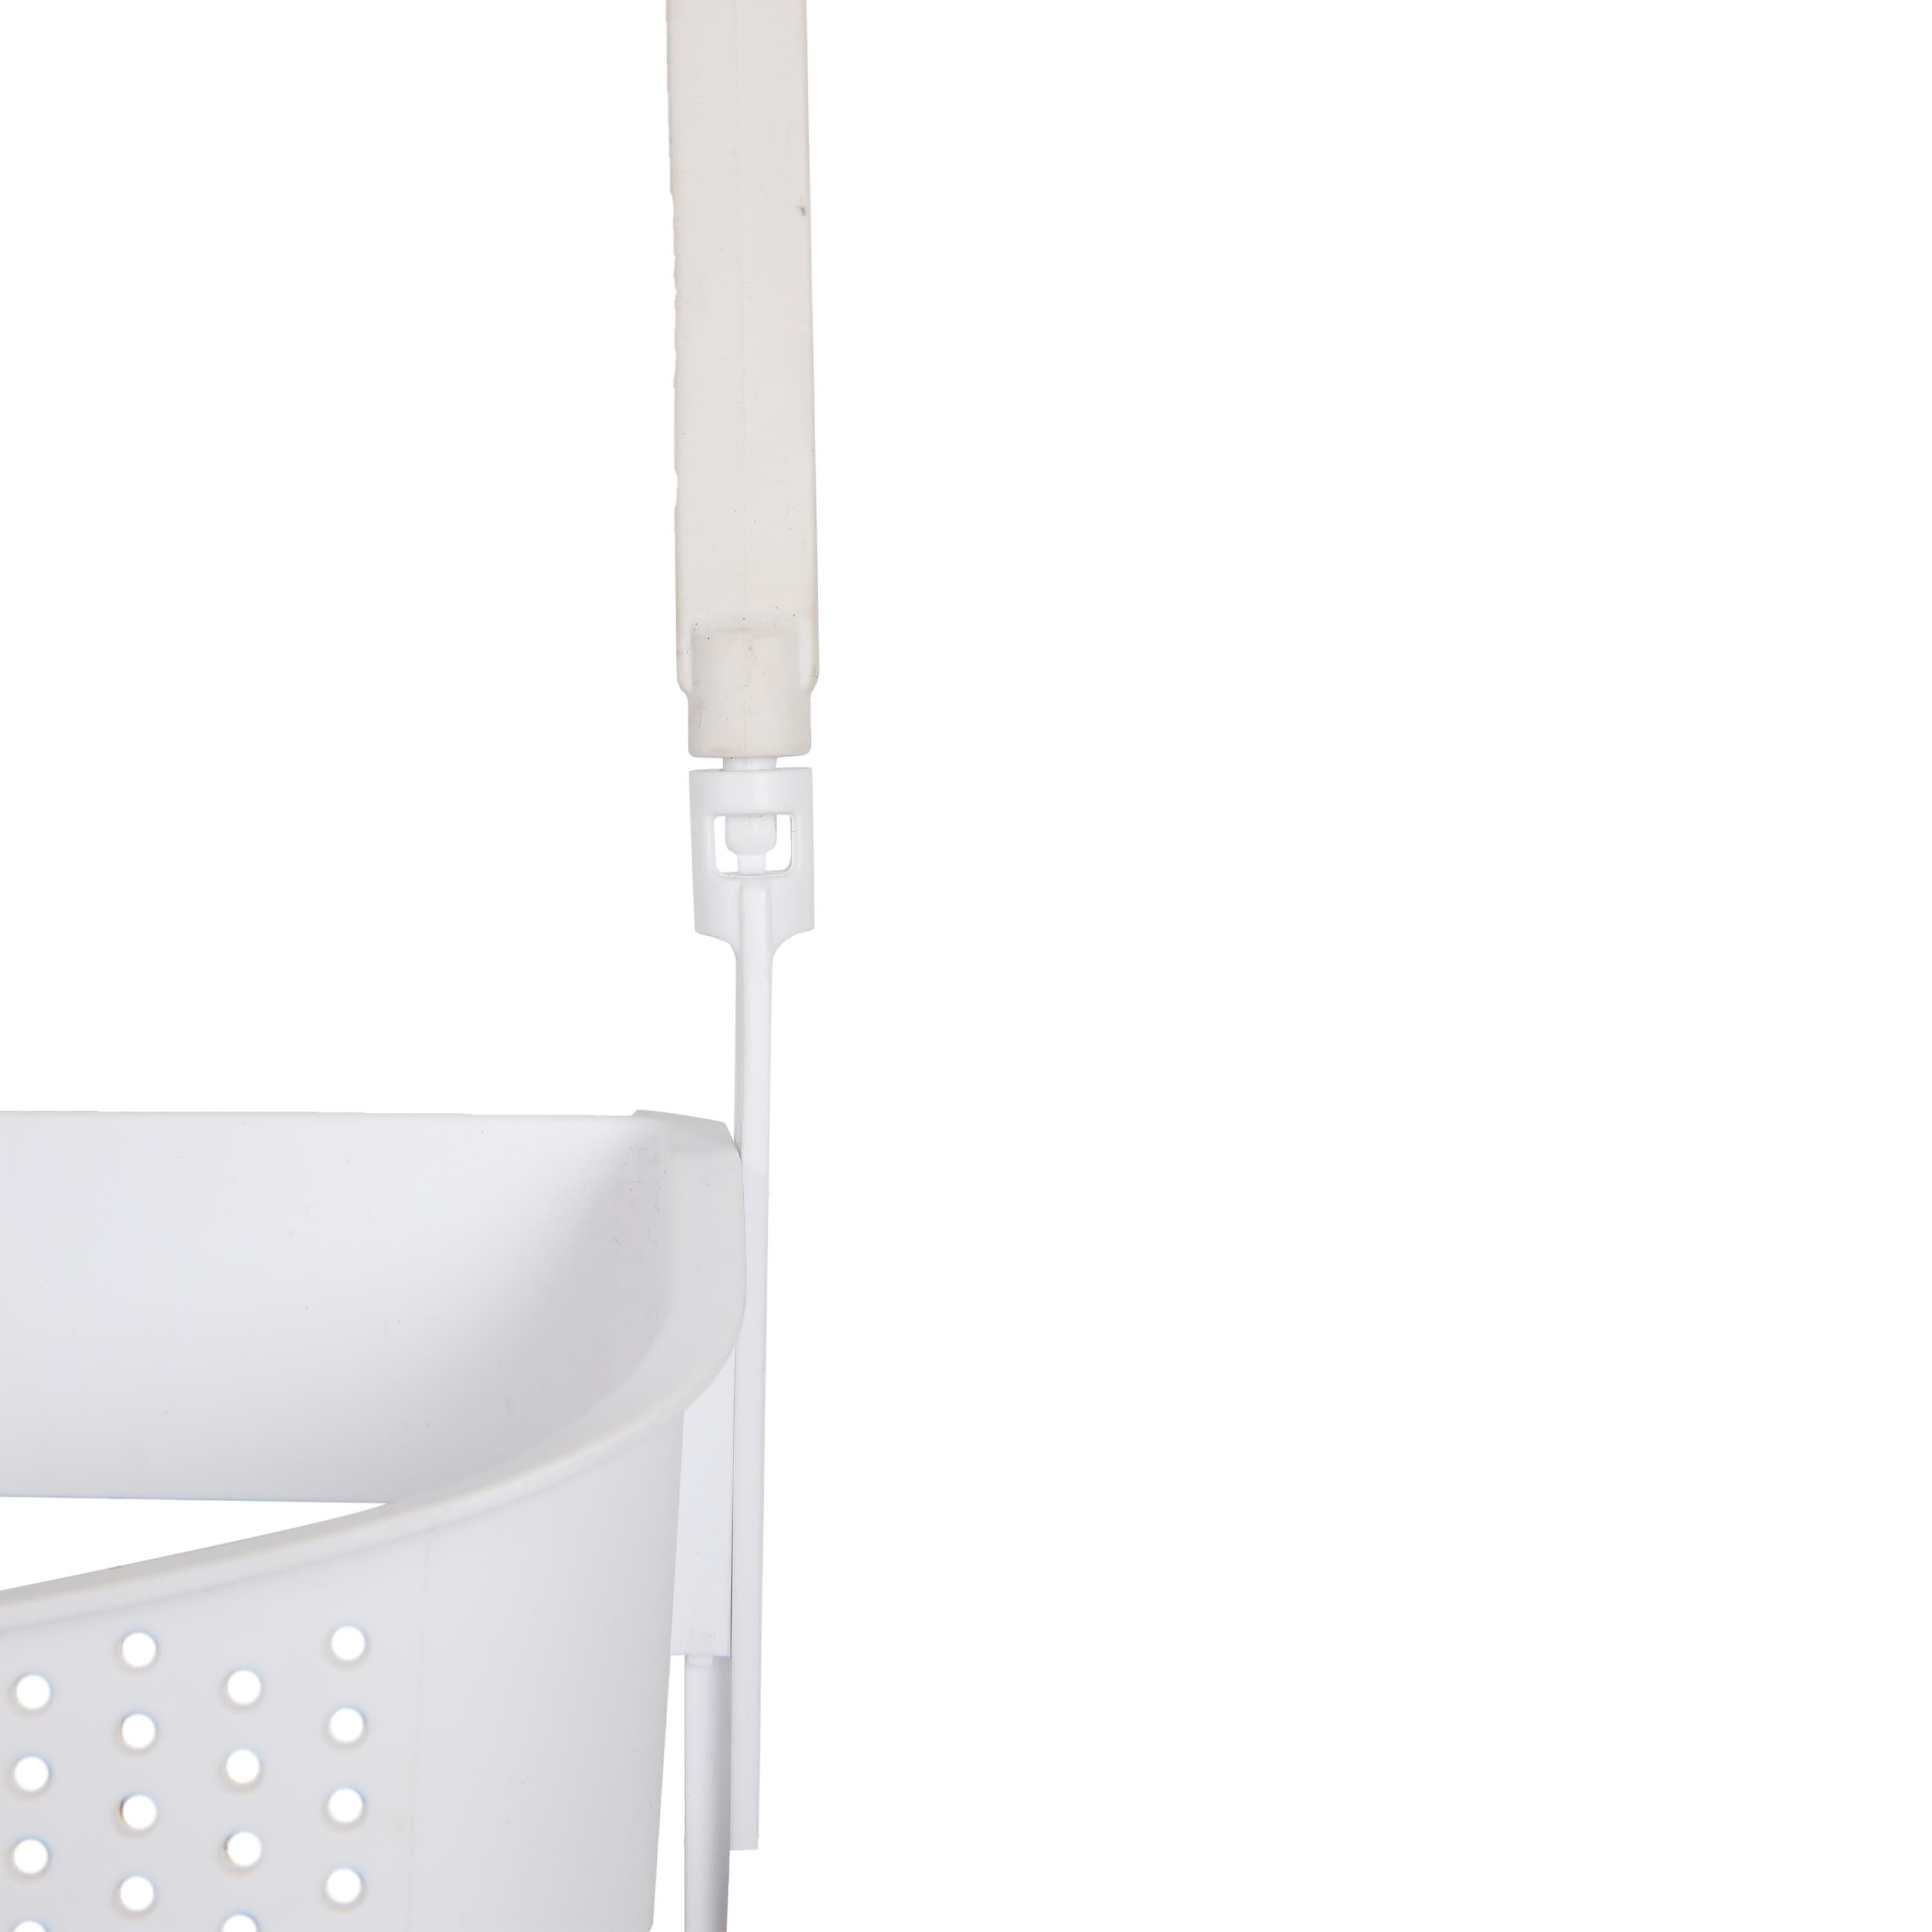 Bath Bliss 3-Tier Hanging Suction Shower Caddy in White 10114-WHITE - The  Home Depot